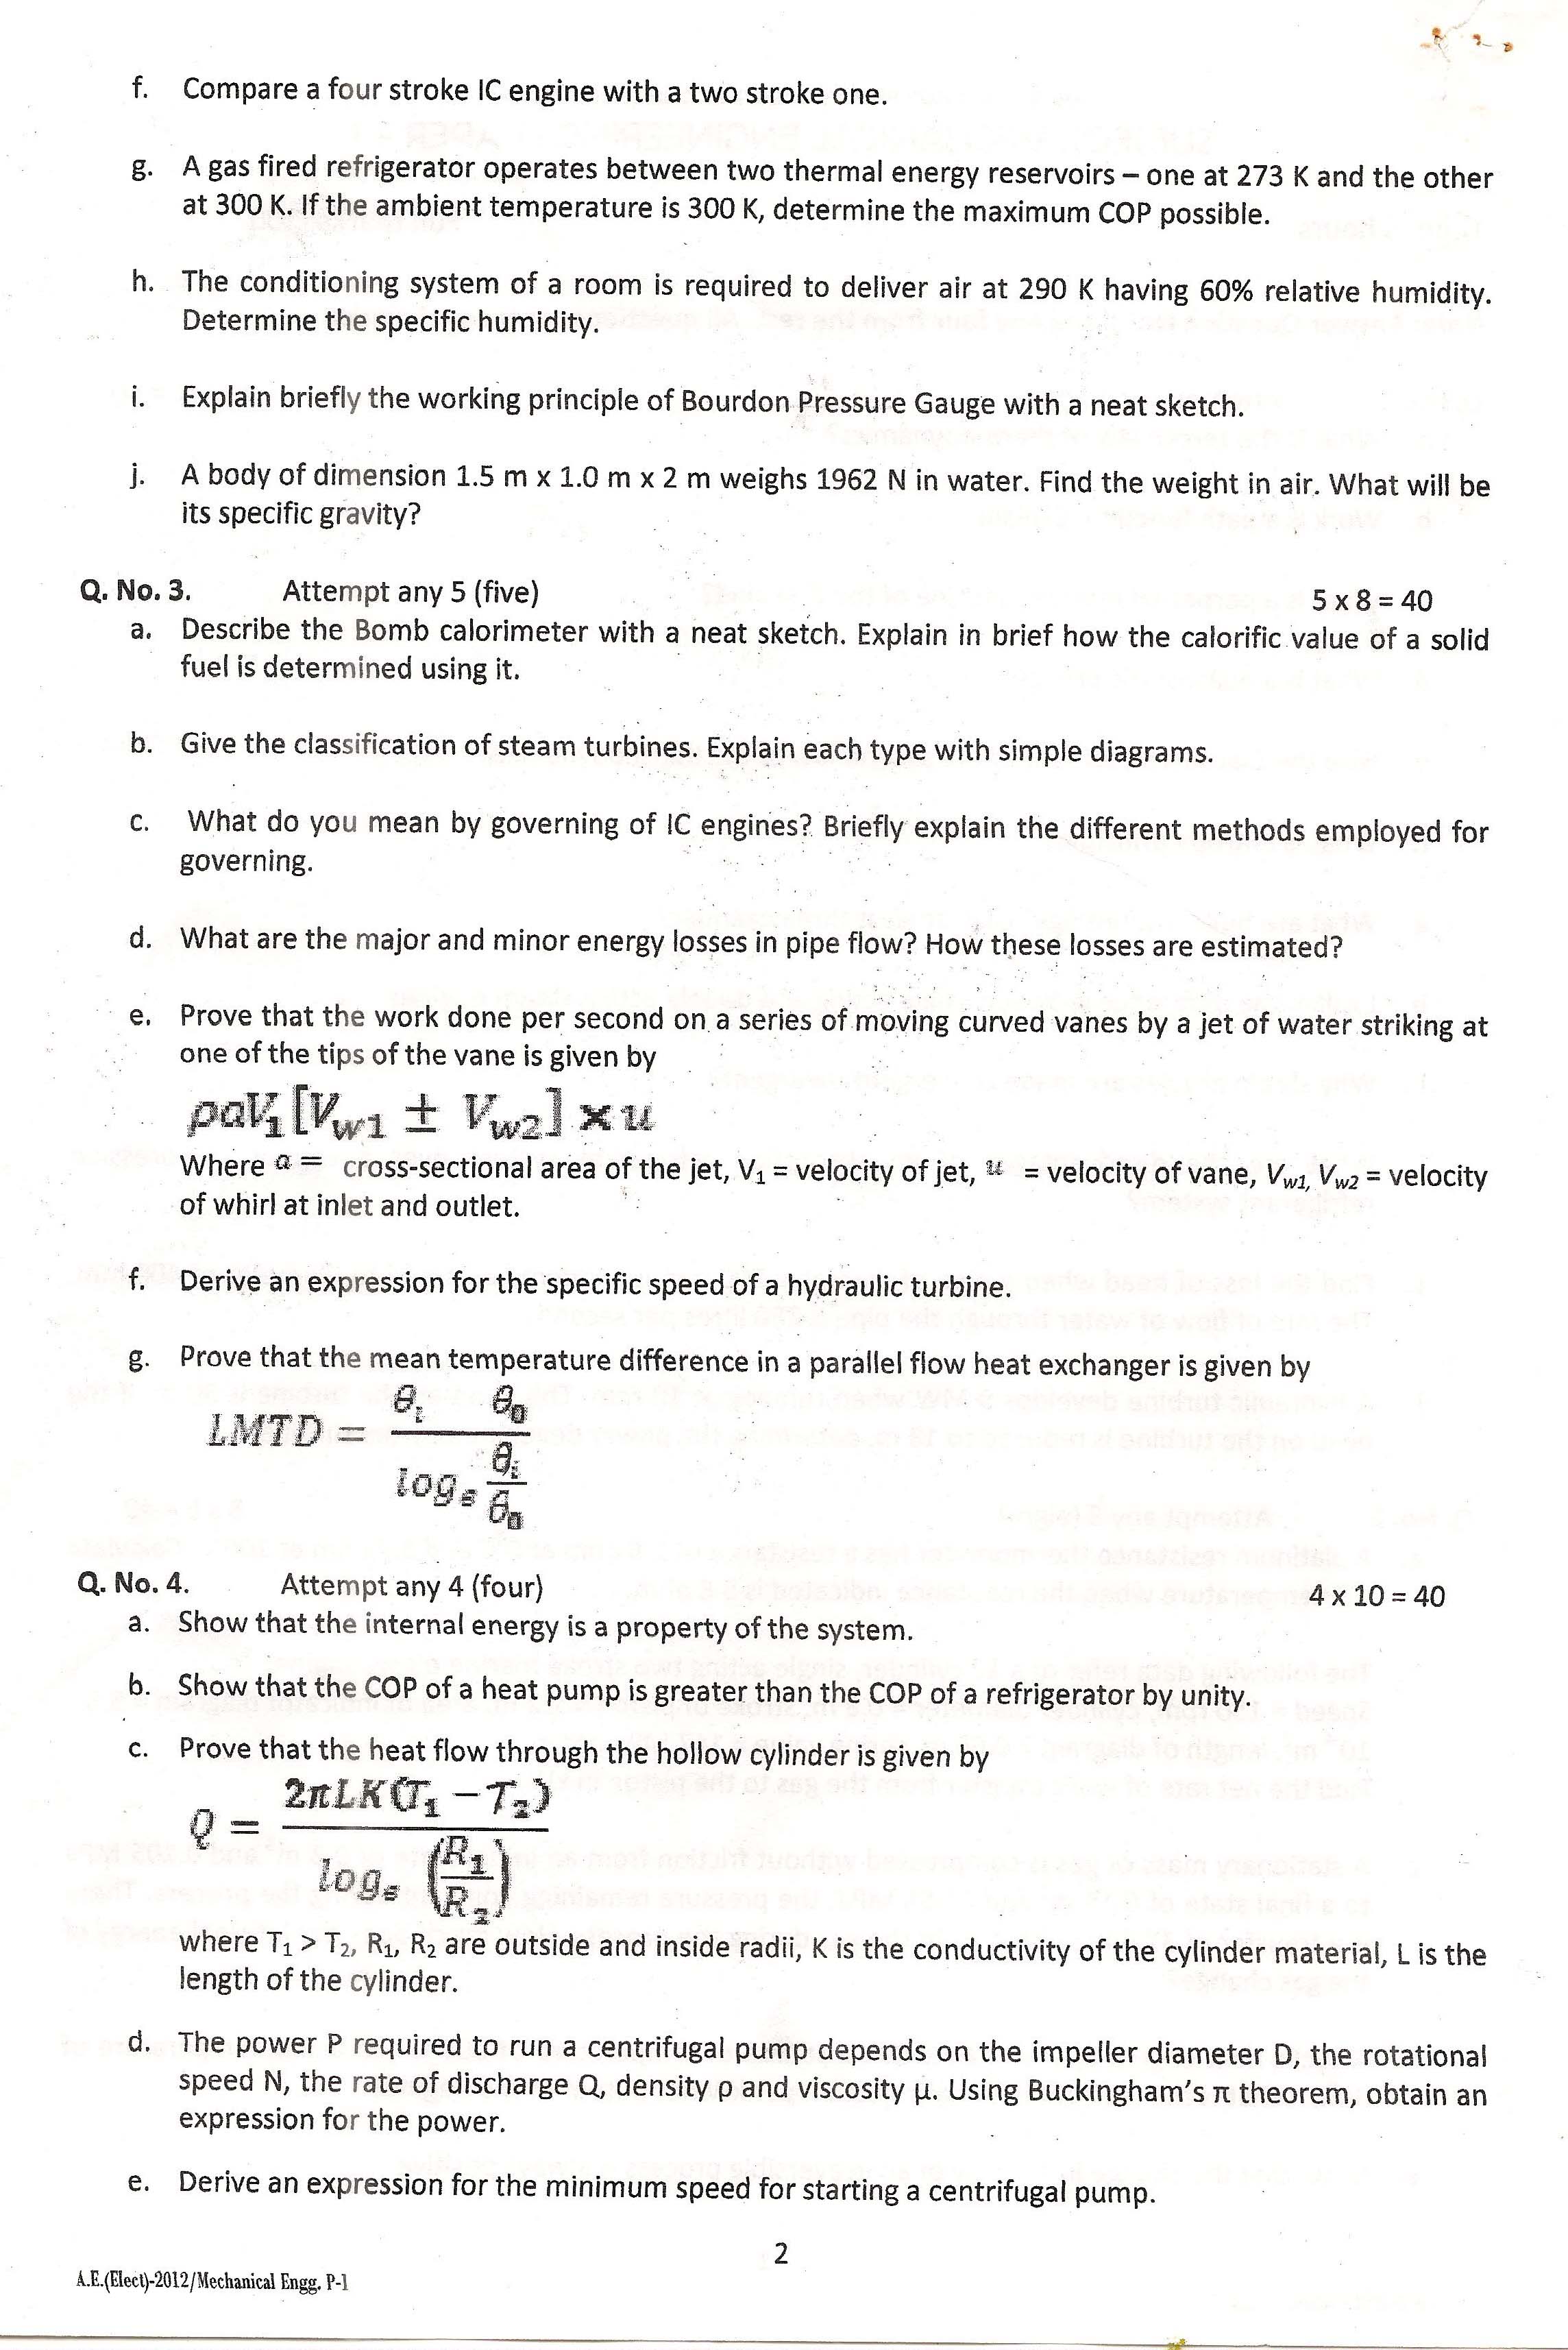 APPSC AE Electrical Exam 2012 Mechanical Engineering Paper I 2